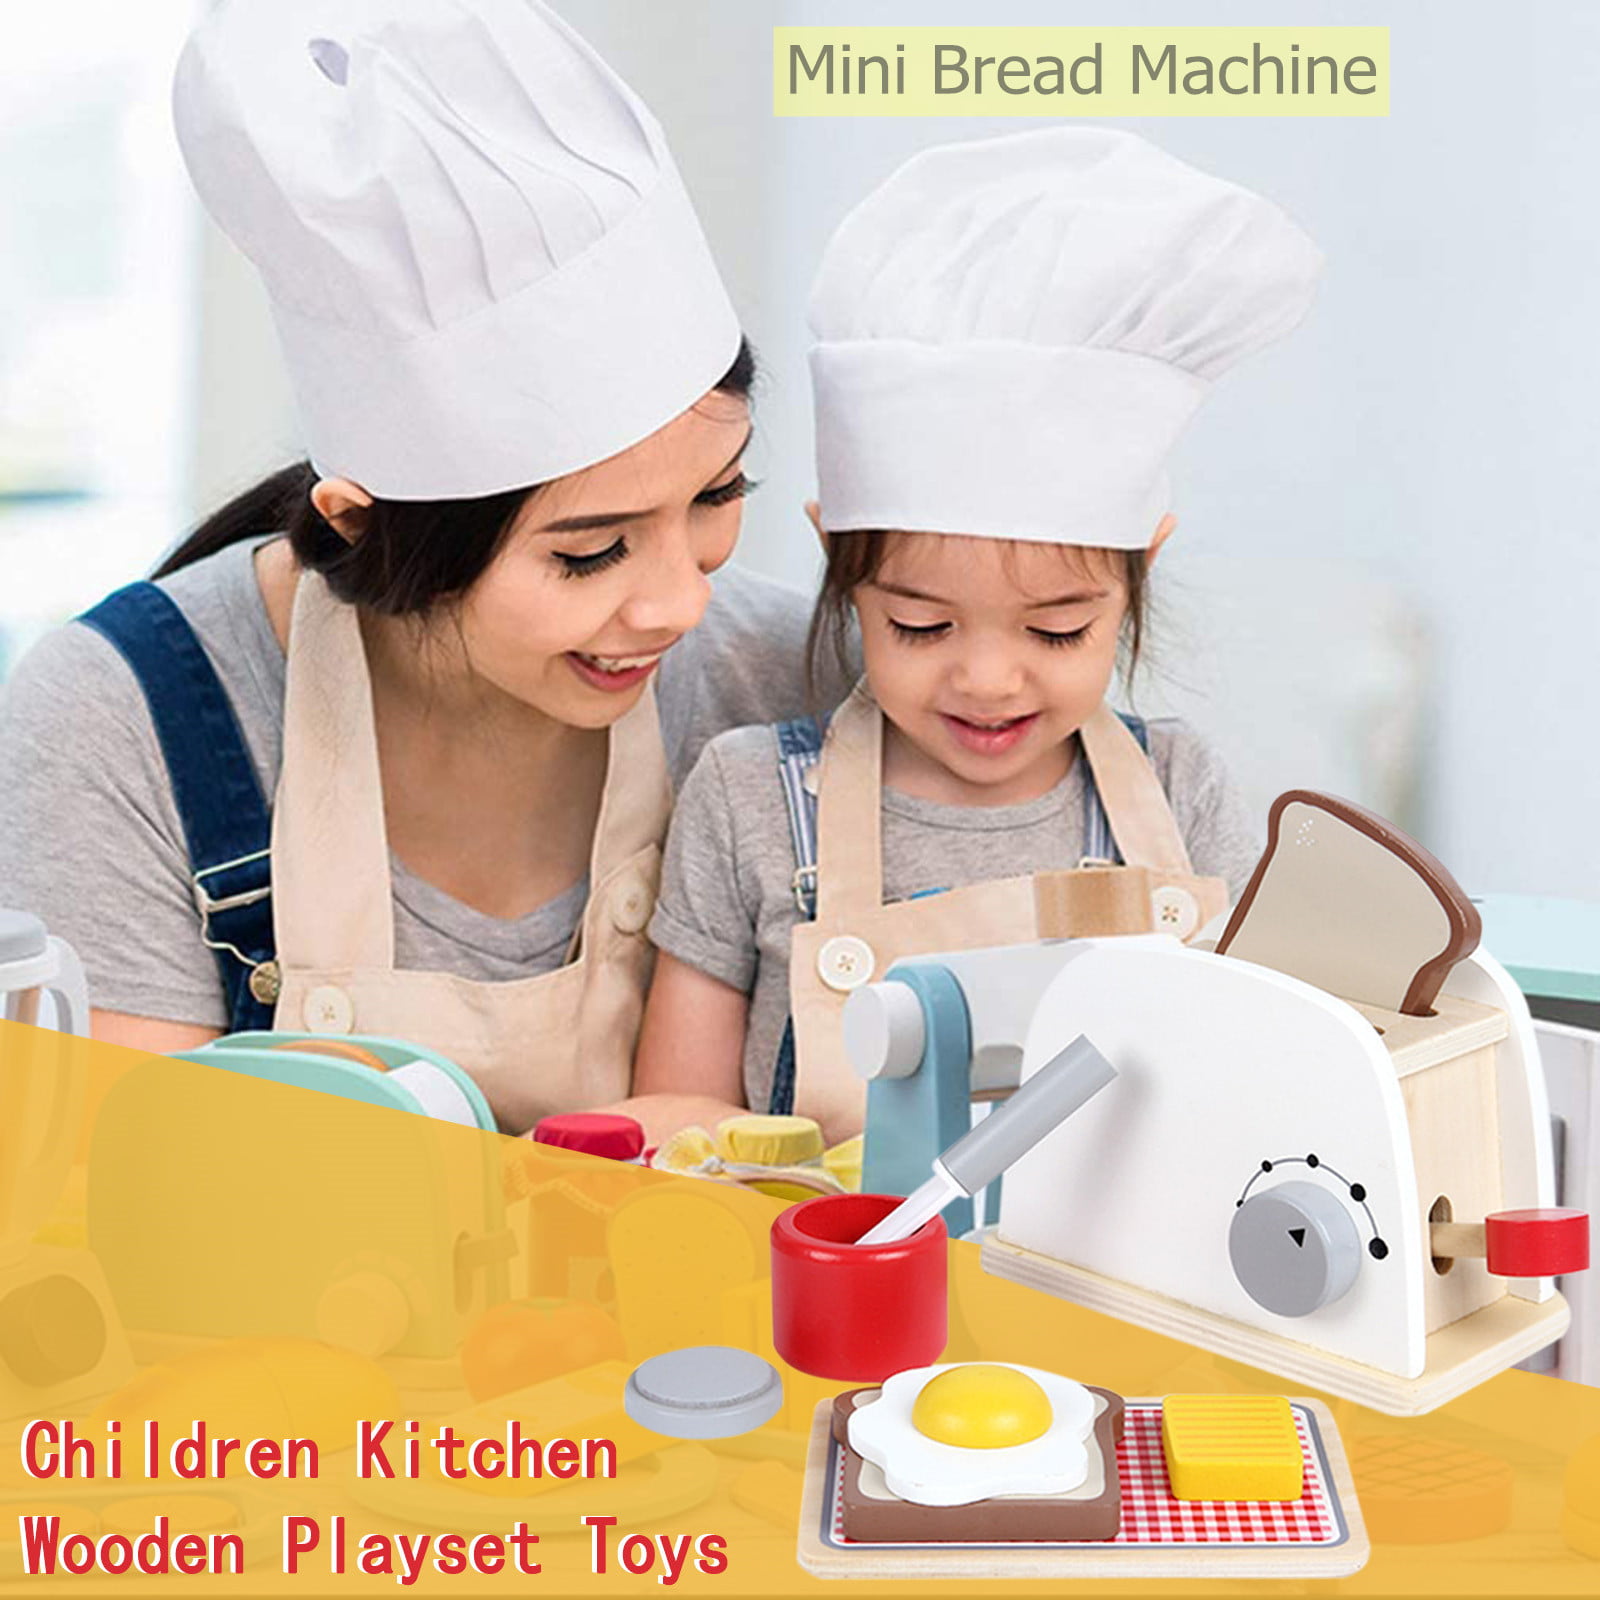 Details about   Kitchen Play Set For Kids Wooden Playset Toy Pretend Baker Cooking Toddler Gift 